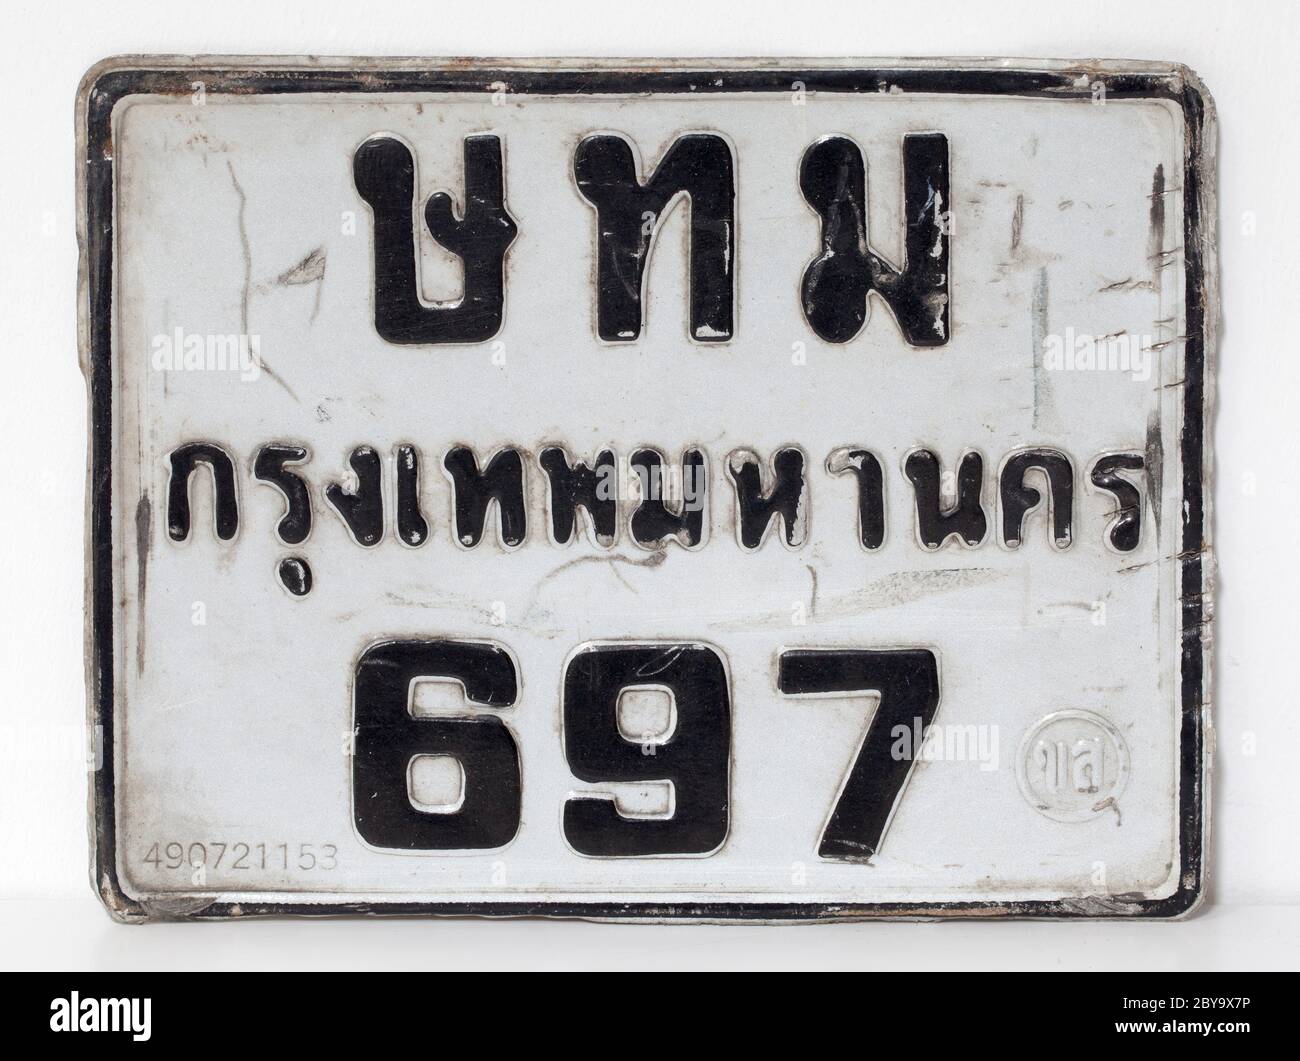 Old Thai Motorcycle Registration Number Plate Stock Photo